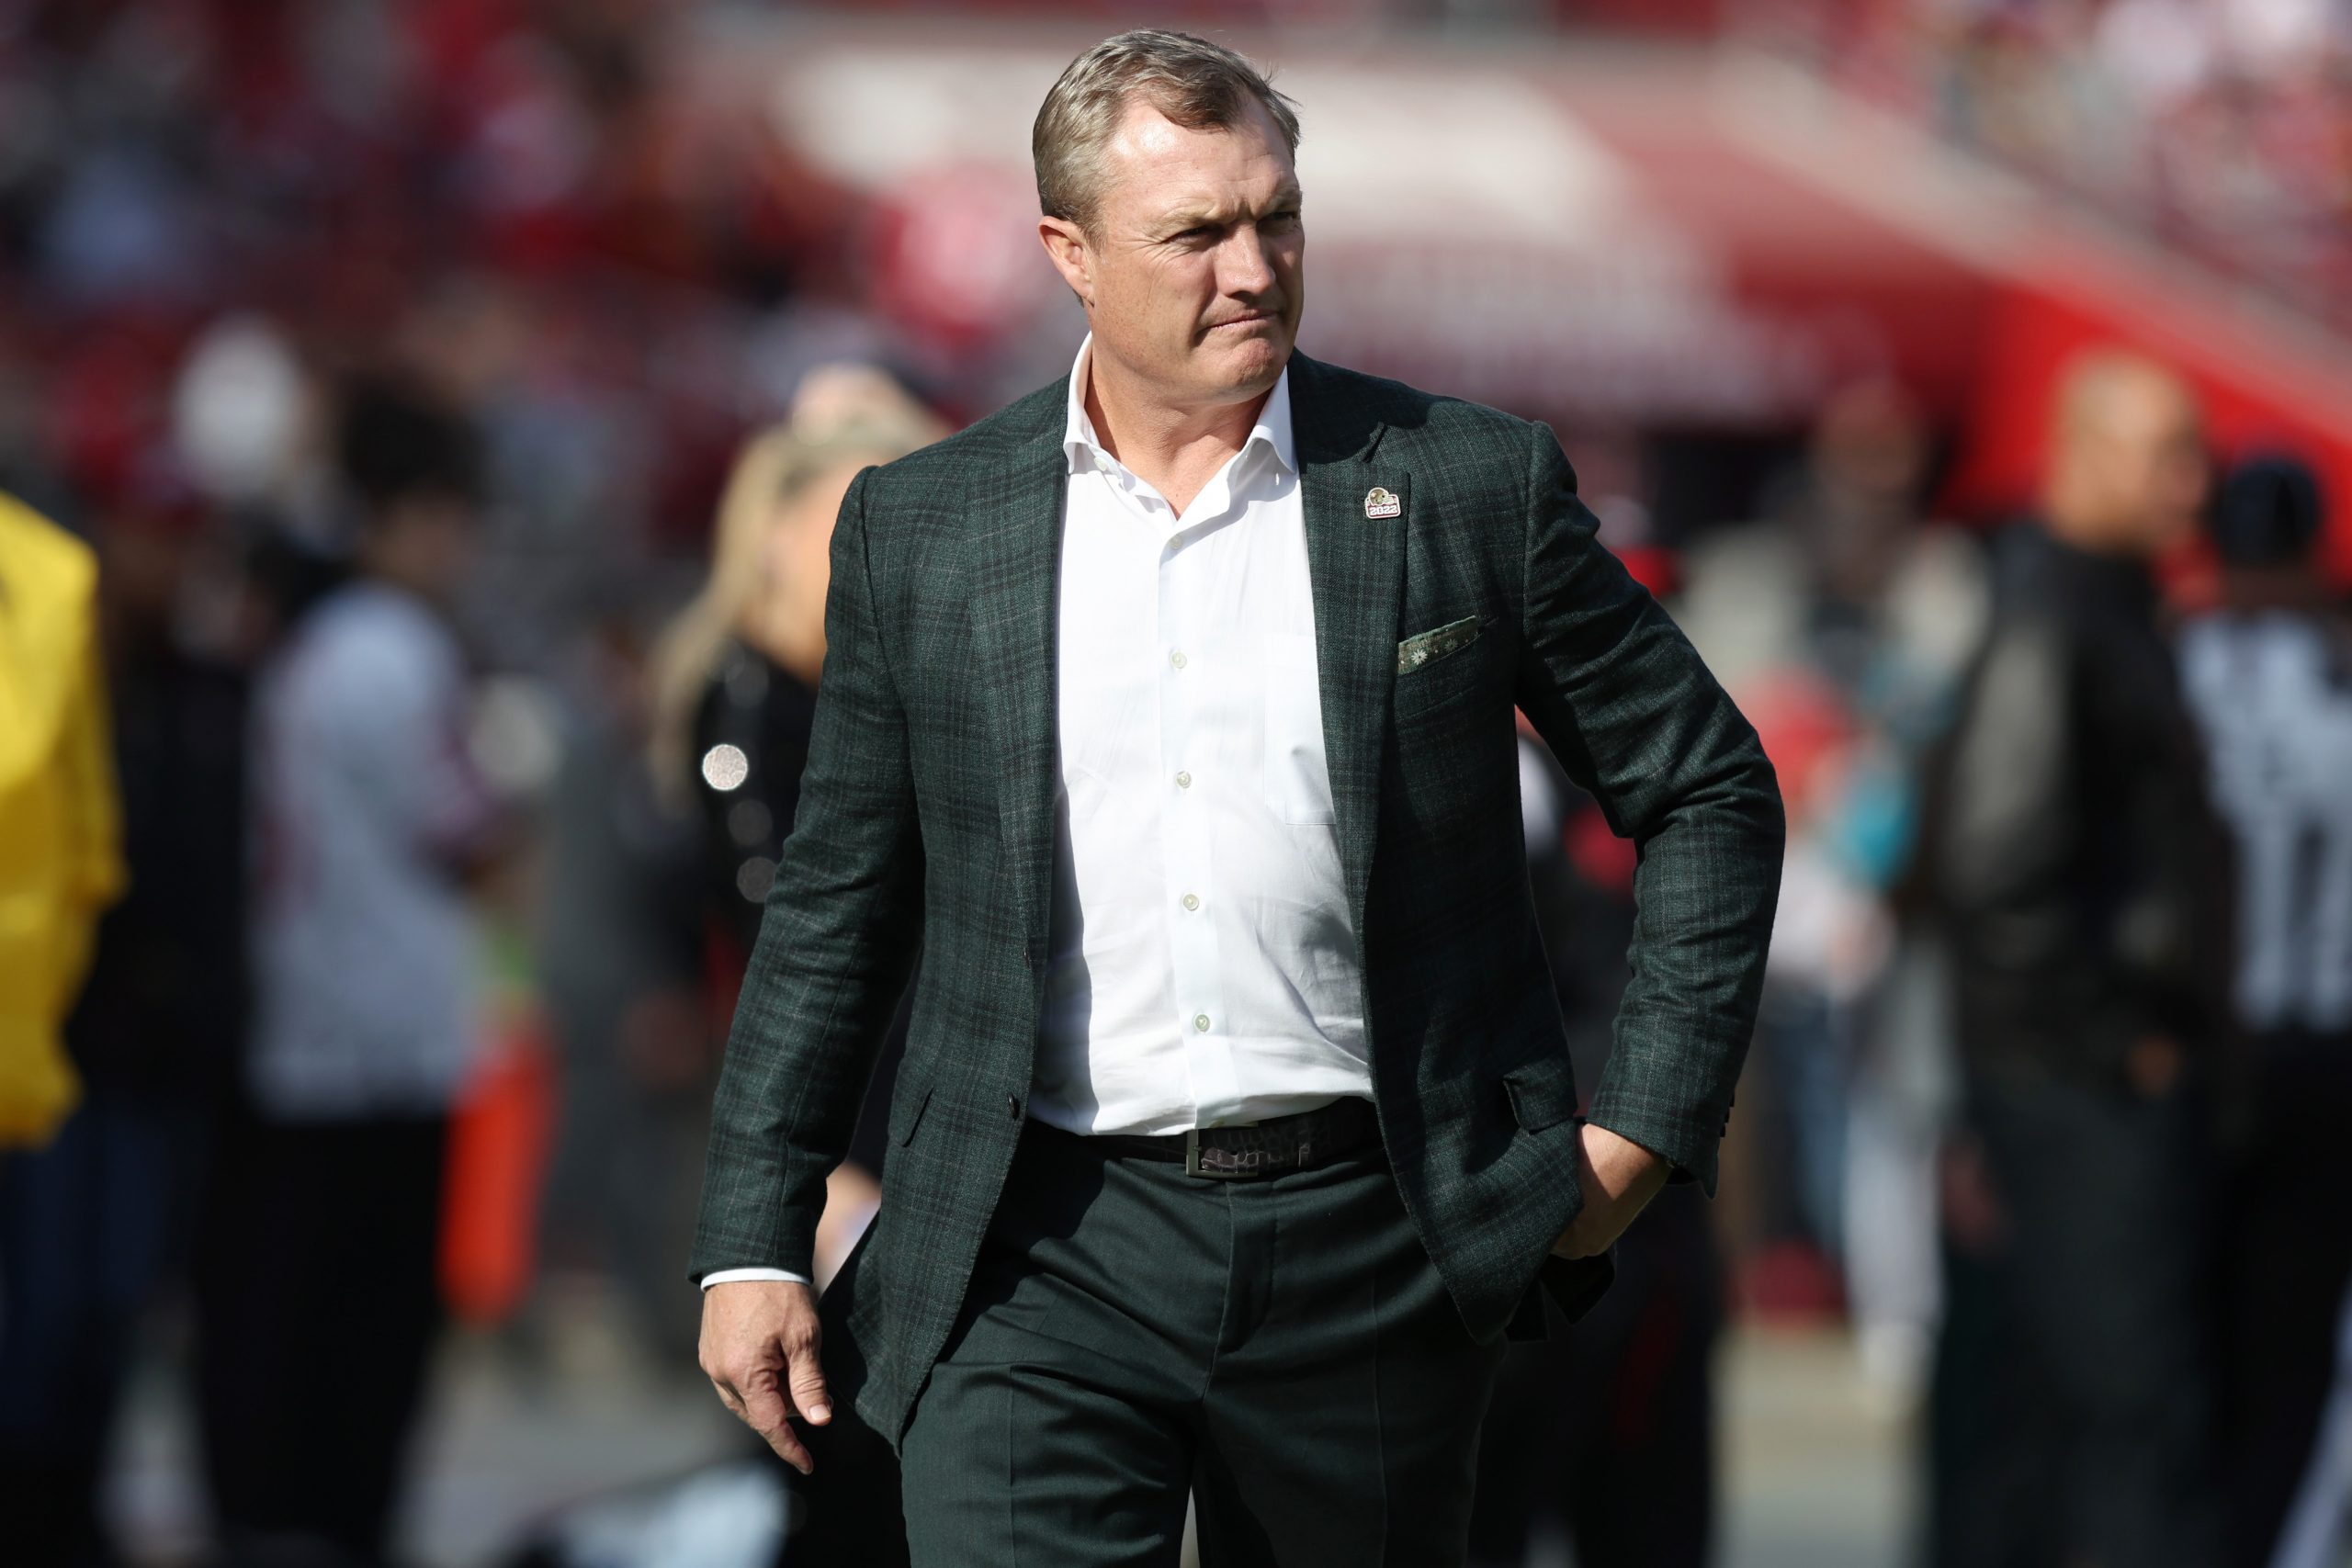 San Francisco 49ers general manager, John Lynch, looks on before the game against the Washington Co...